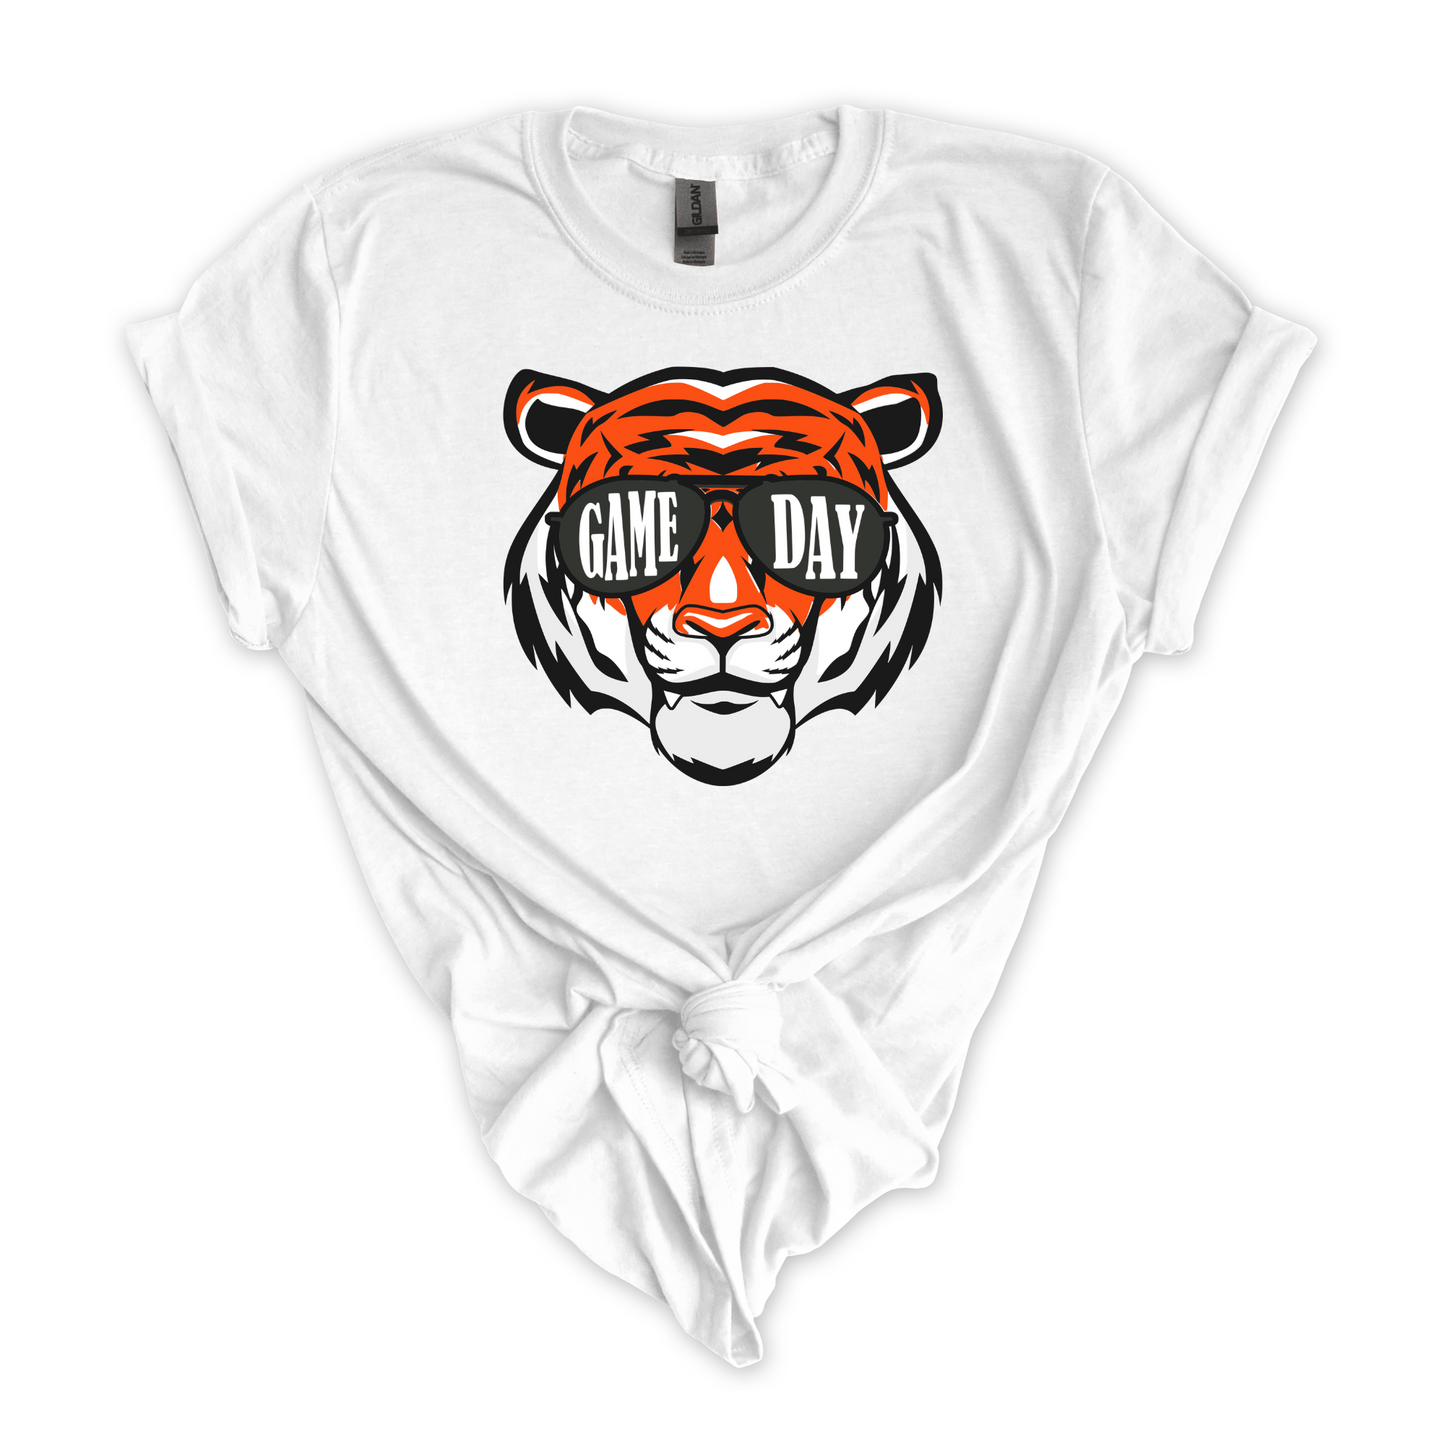 Bengals Game Day Tshirt